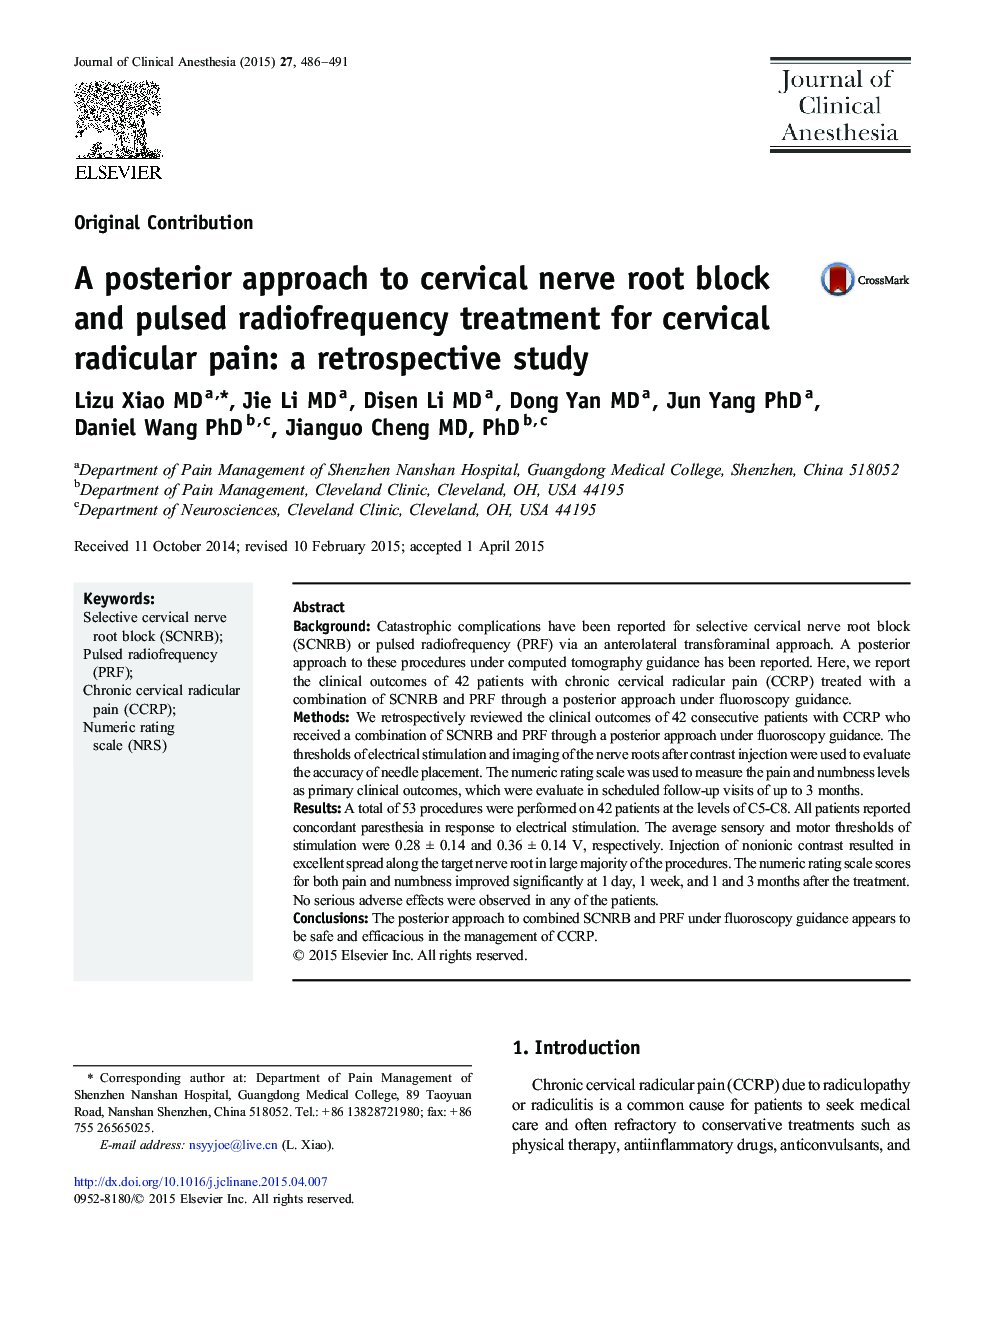 A posterior approach to cervical nerve root block and pulsed radiofrequency treatment for cervical radicular pain: a retrospective study